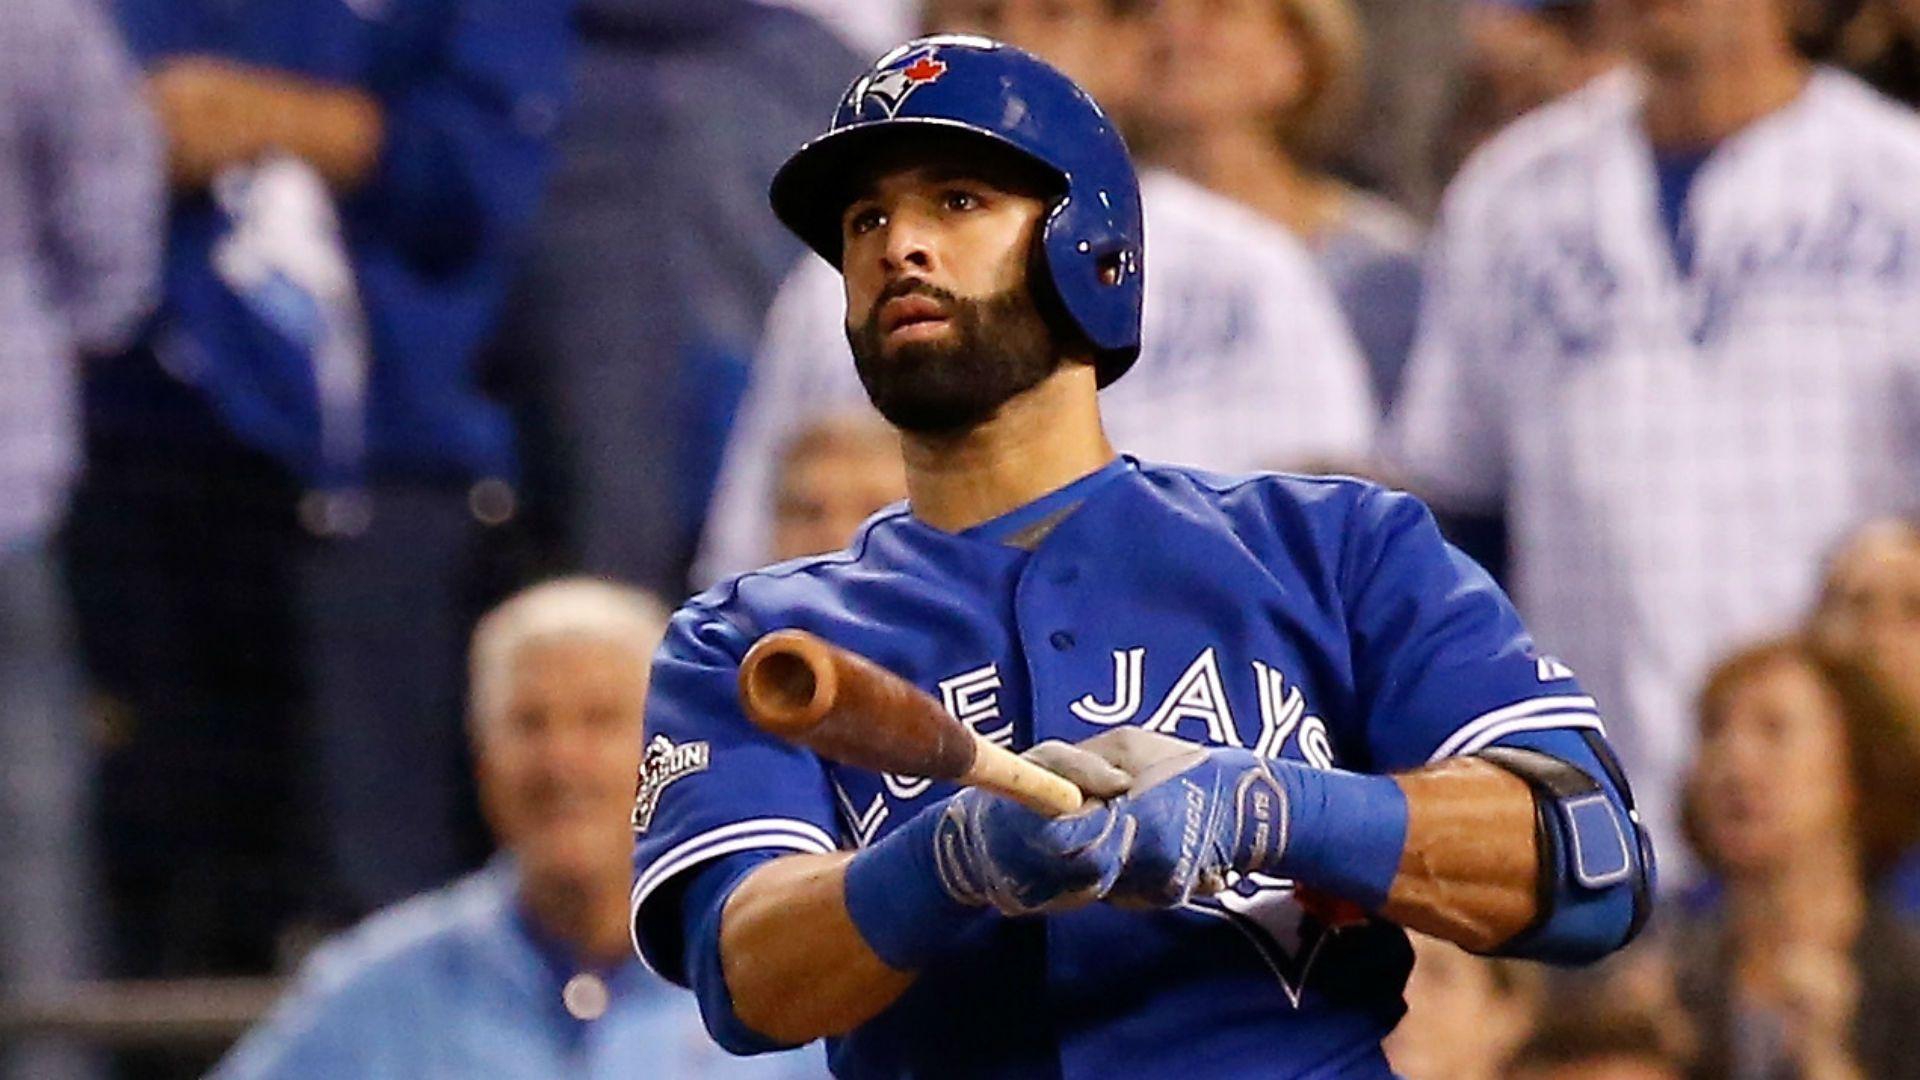 Jose Bautista on Blue Jays contract: 'I don't believe in hometown